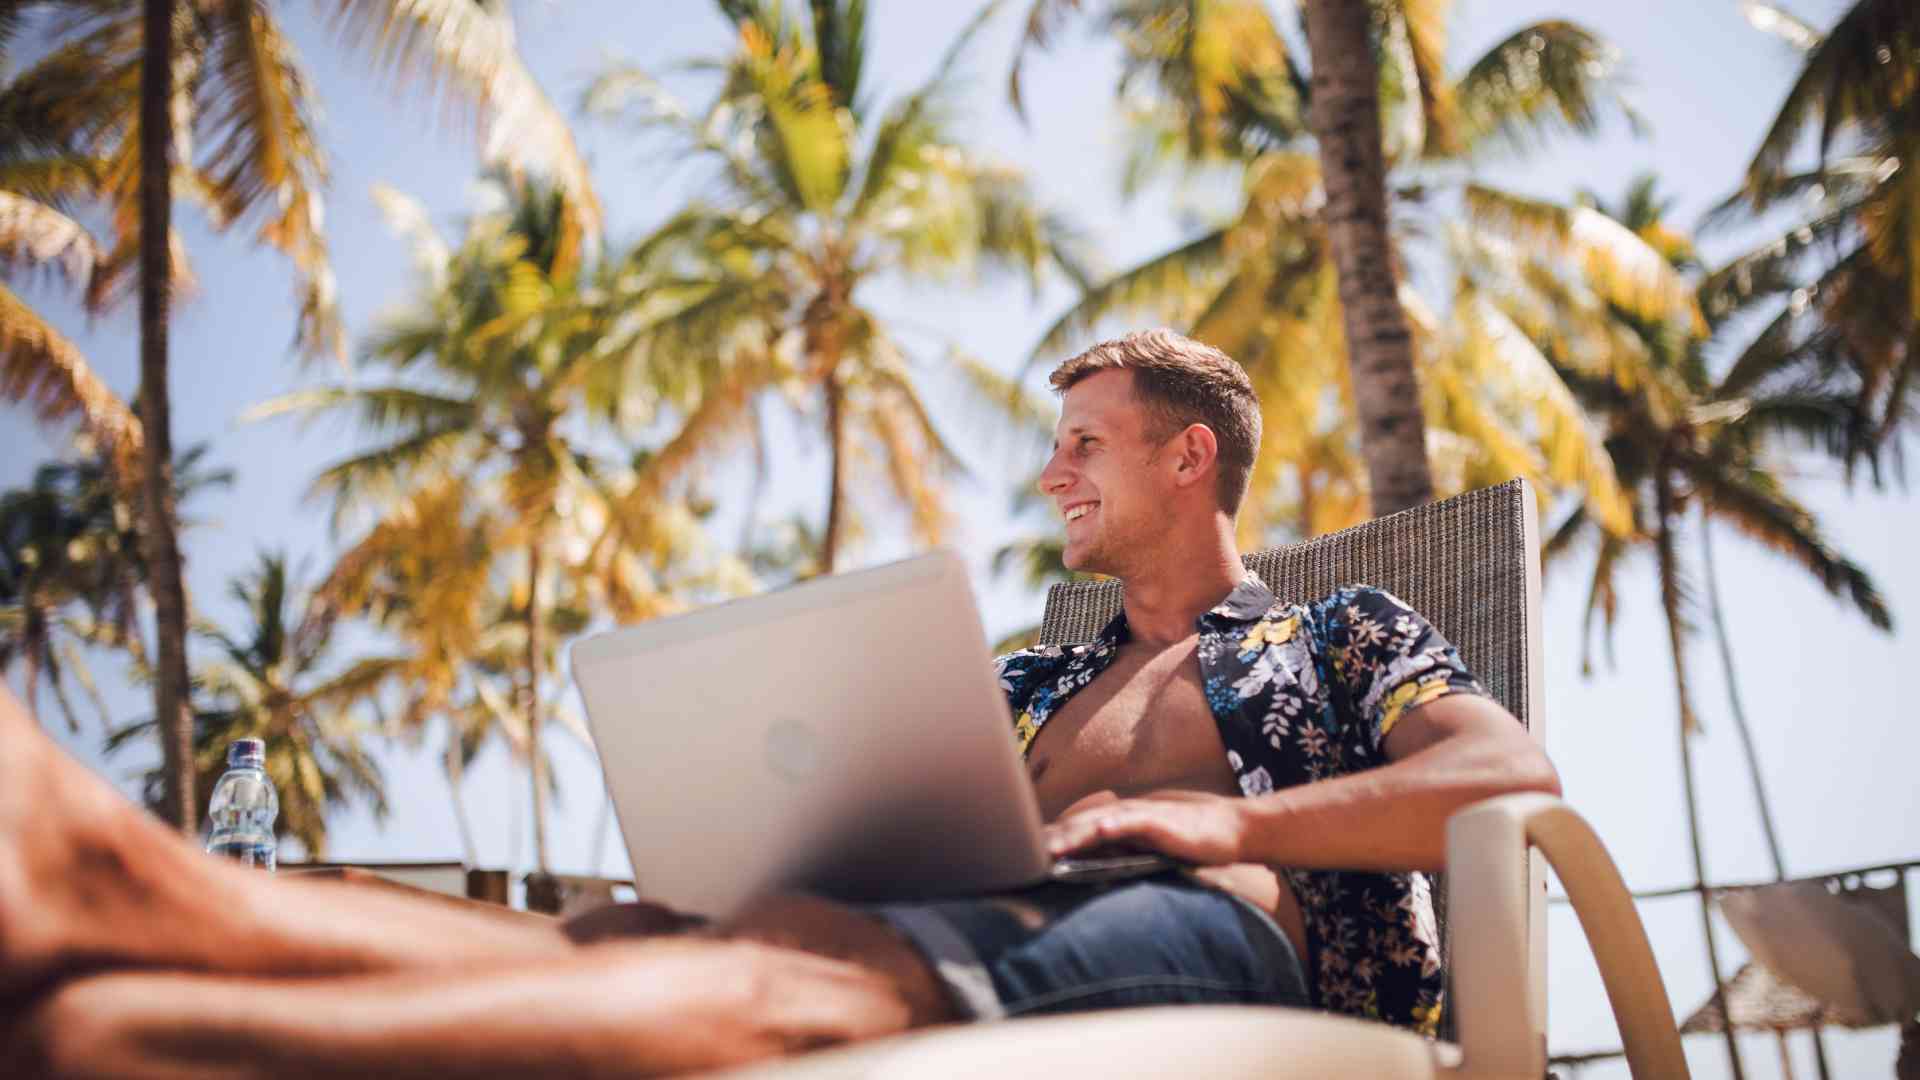 another word for digital nomad